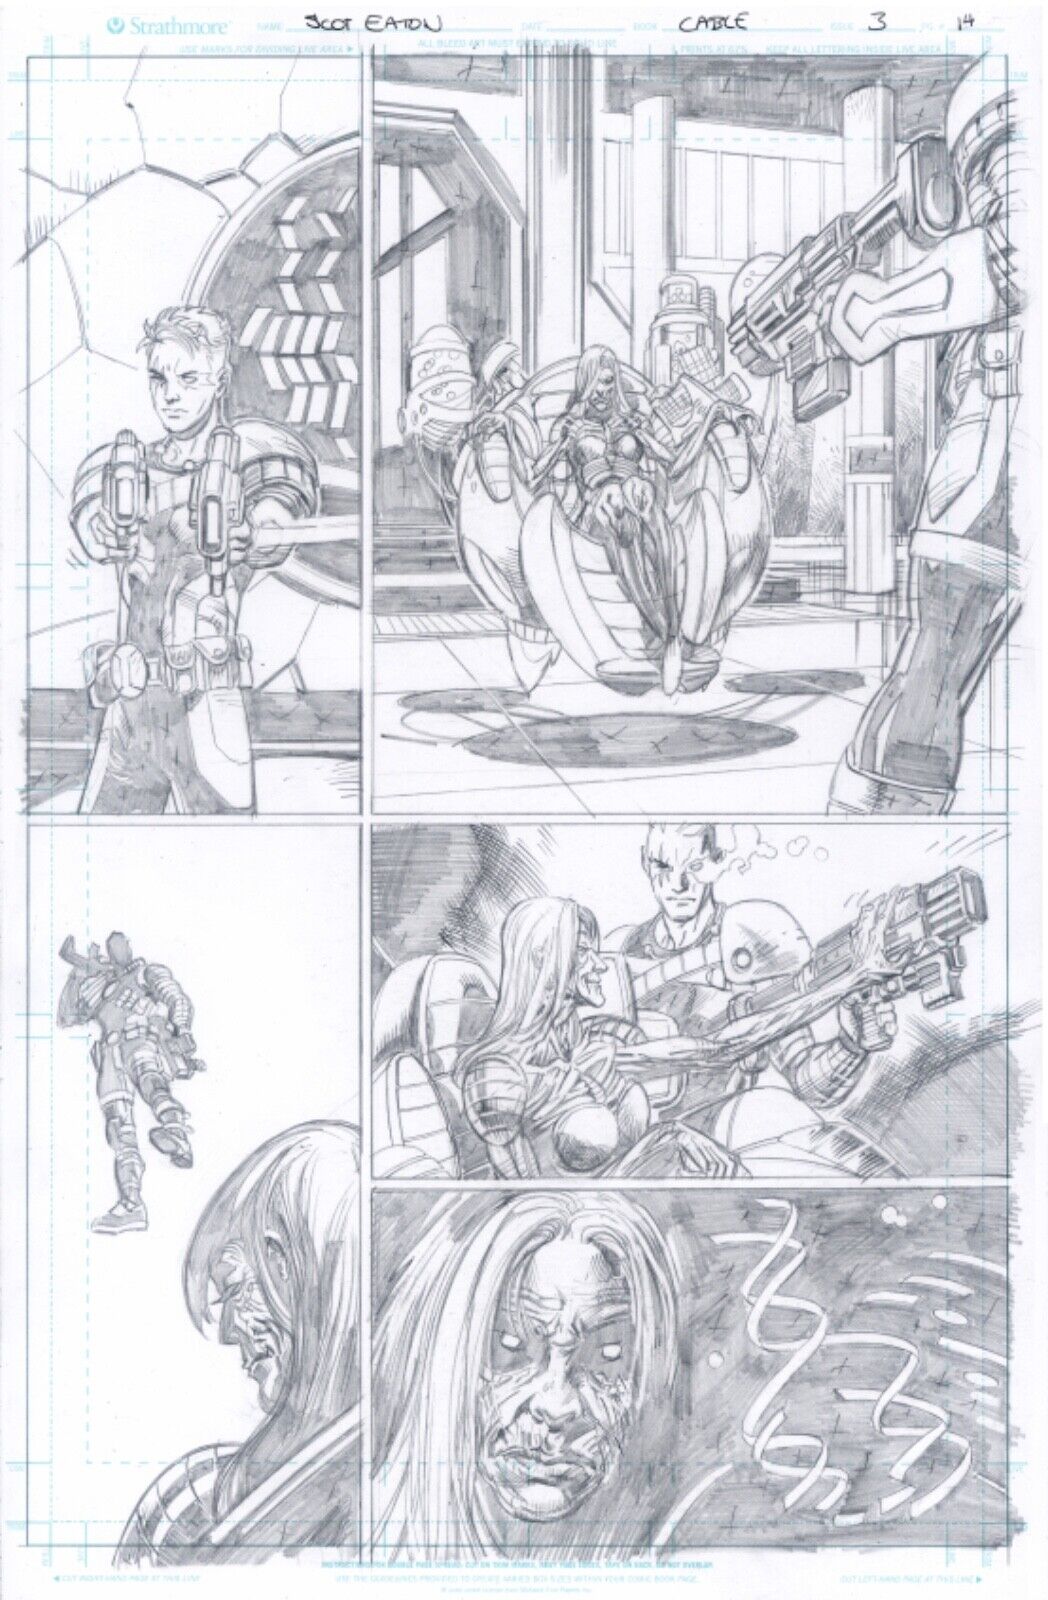 CABLE Original ART.     CABLE #3,  Page 14.     Pencils by SCOT EATON